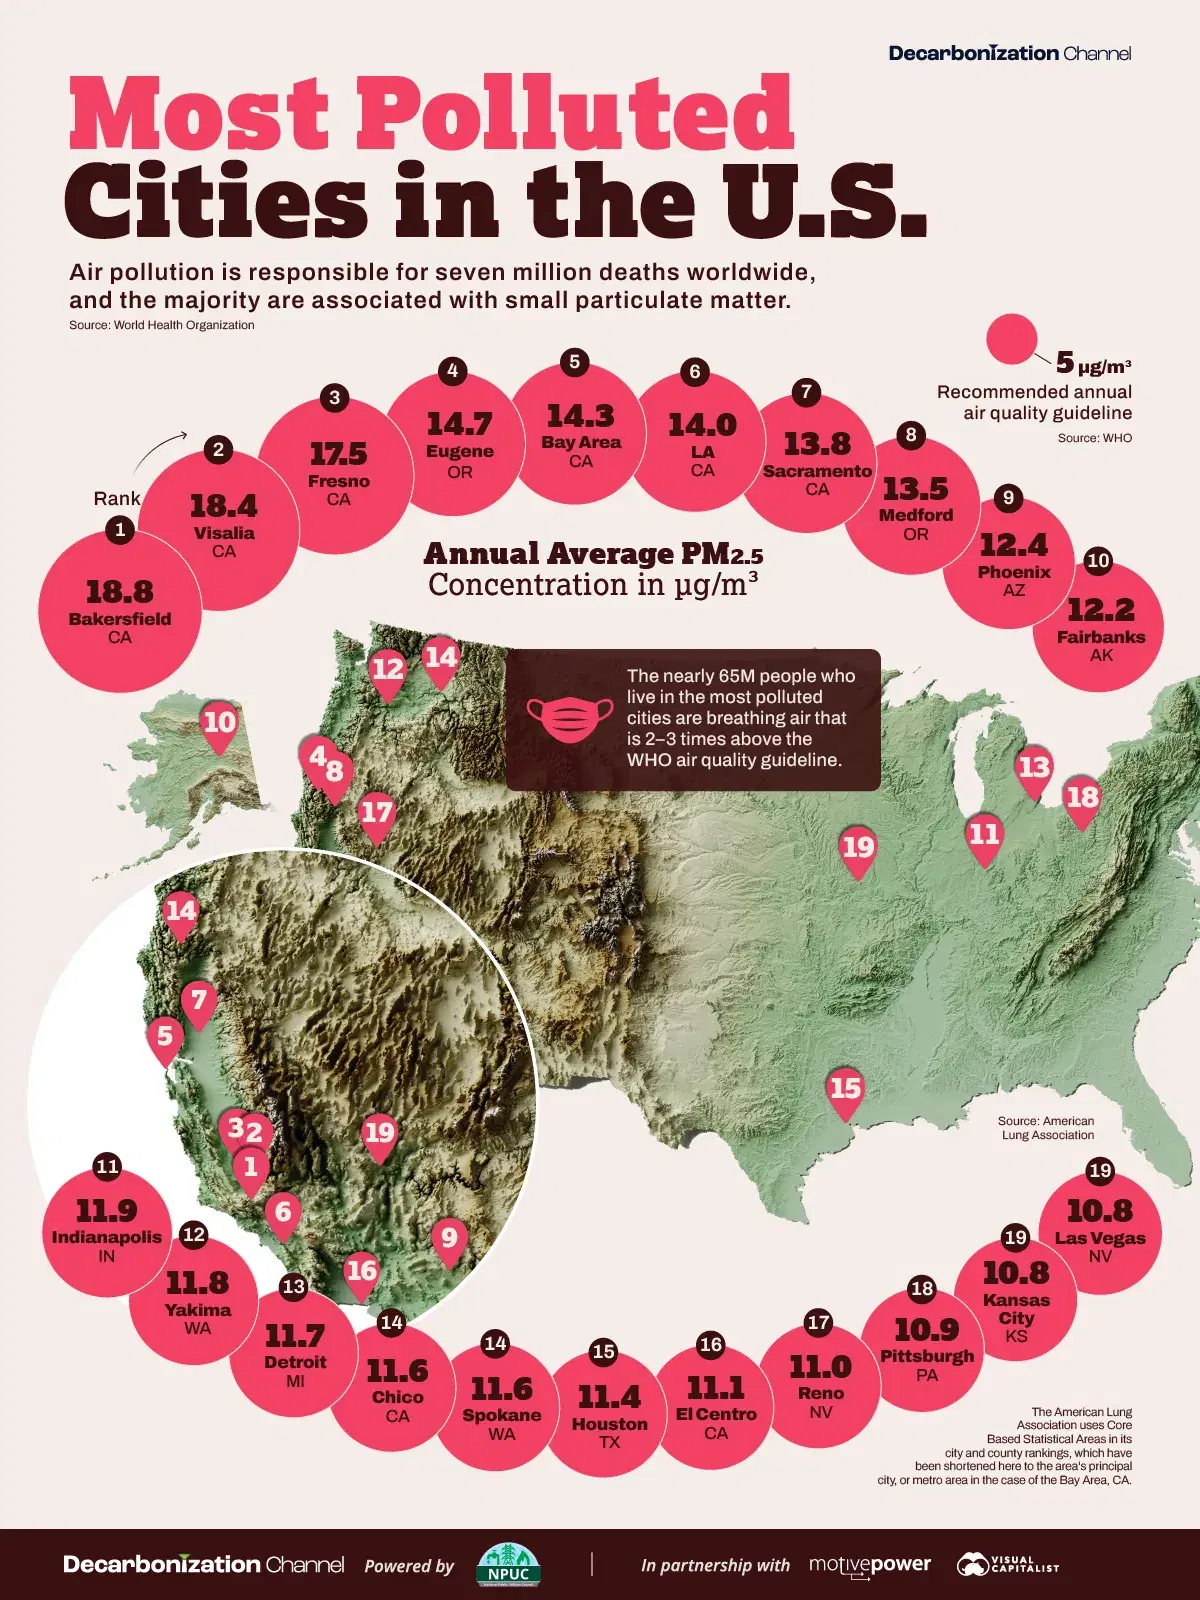 The Most Polluted Cities in the U.S.